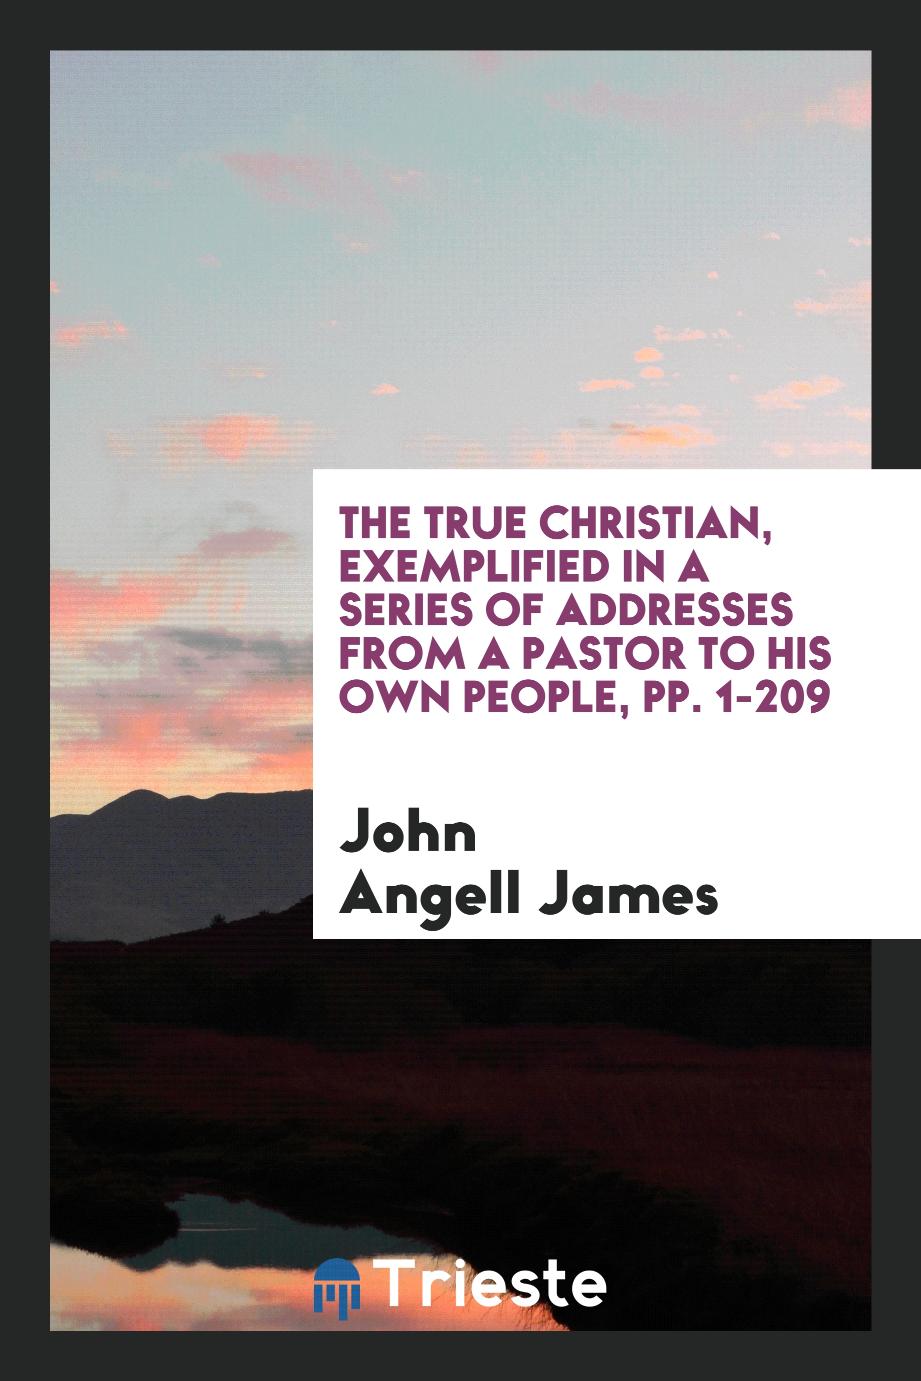 The True Christian, Exemplified in a Series of Addresses from a Pastor to His Own People, pp. 1-209